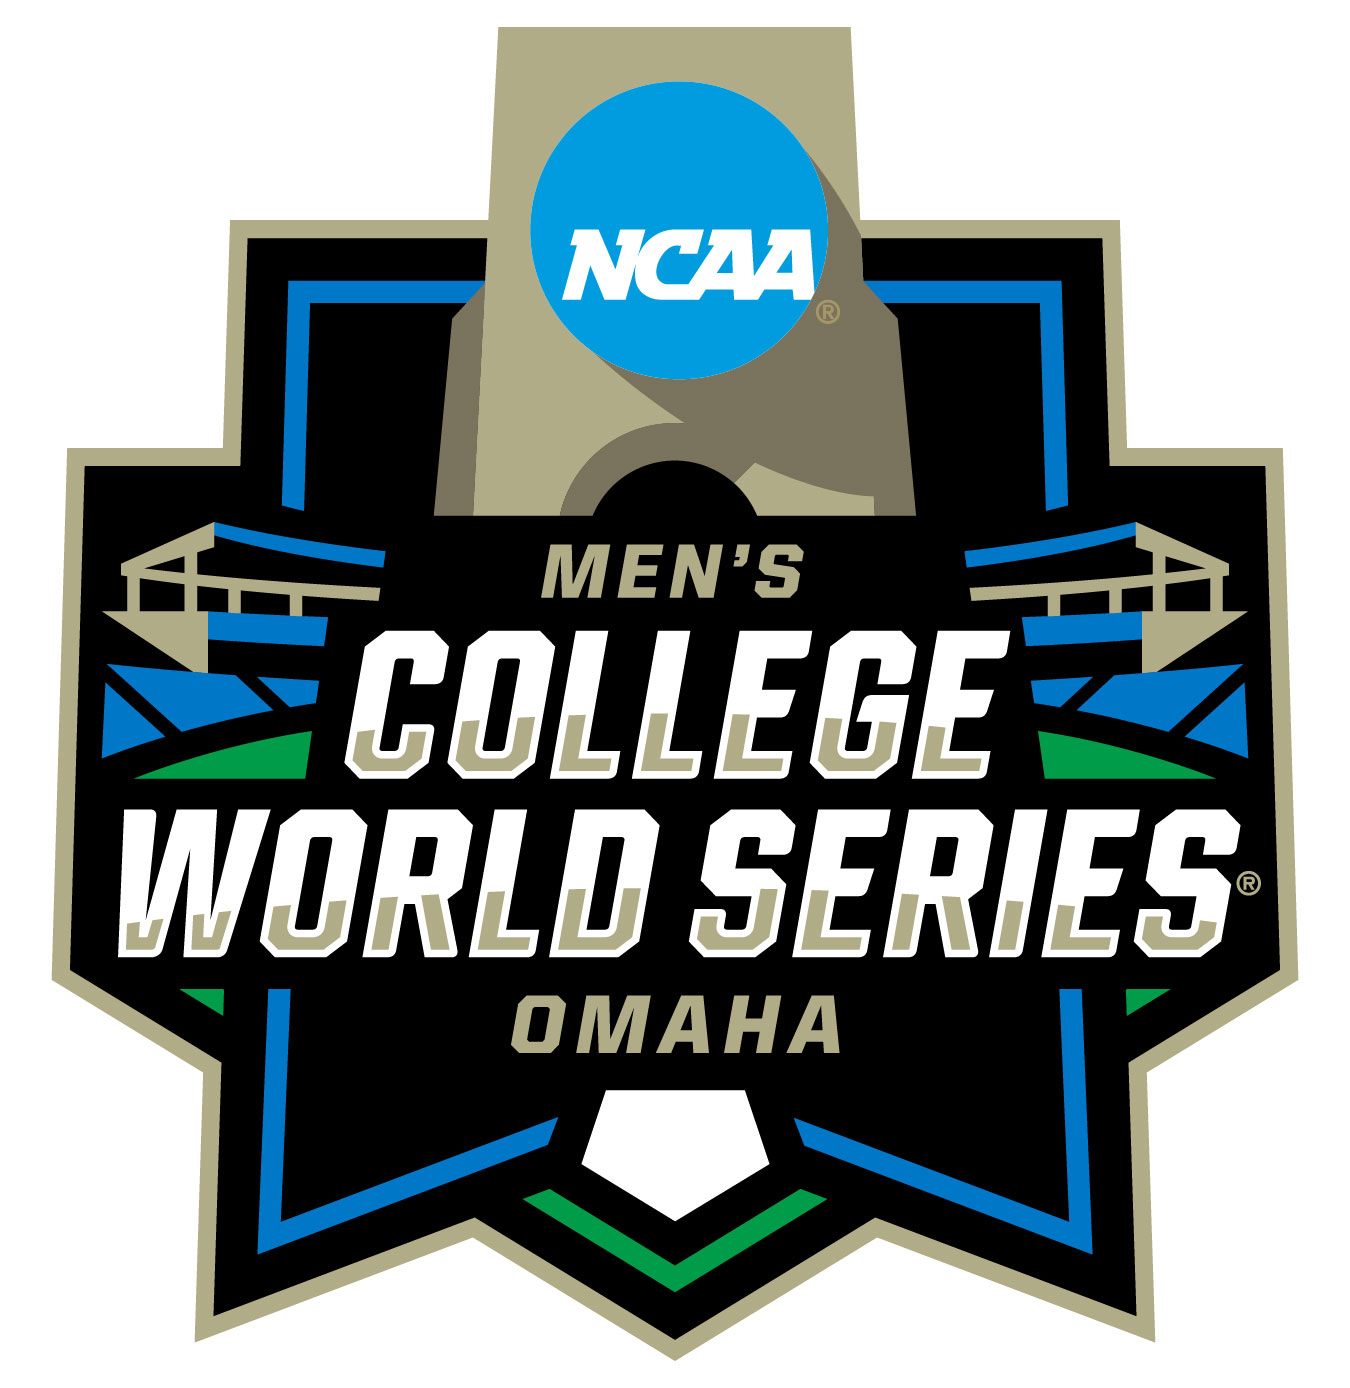 Here are the programs with the most Men's College World Series titles